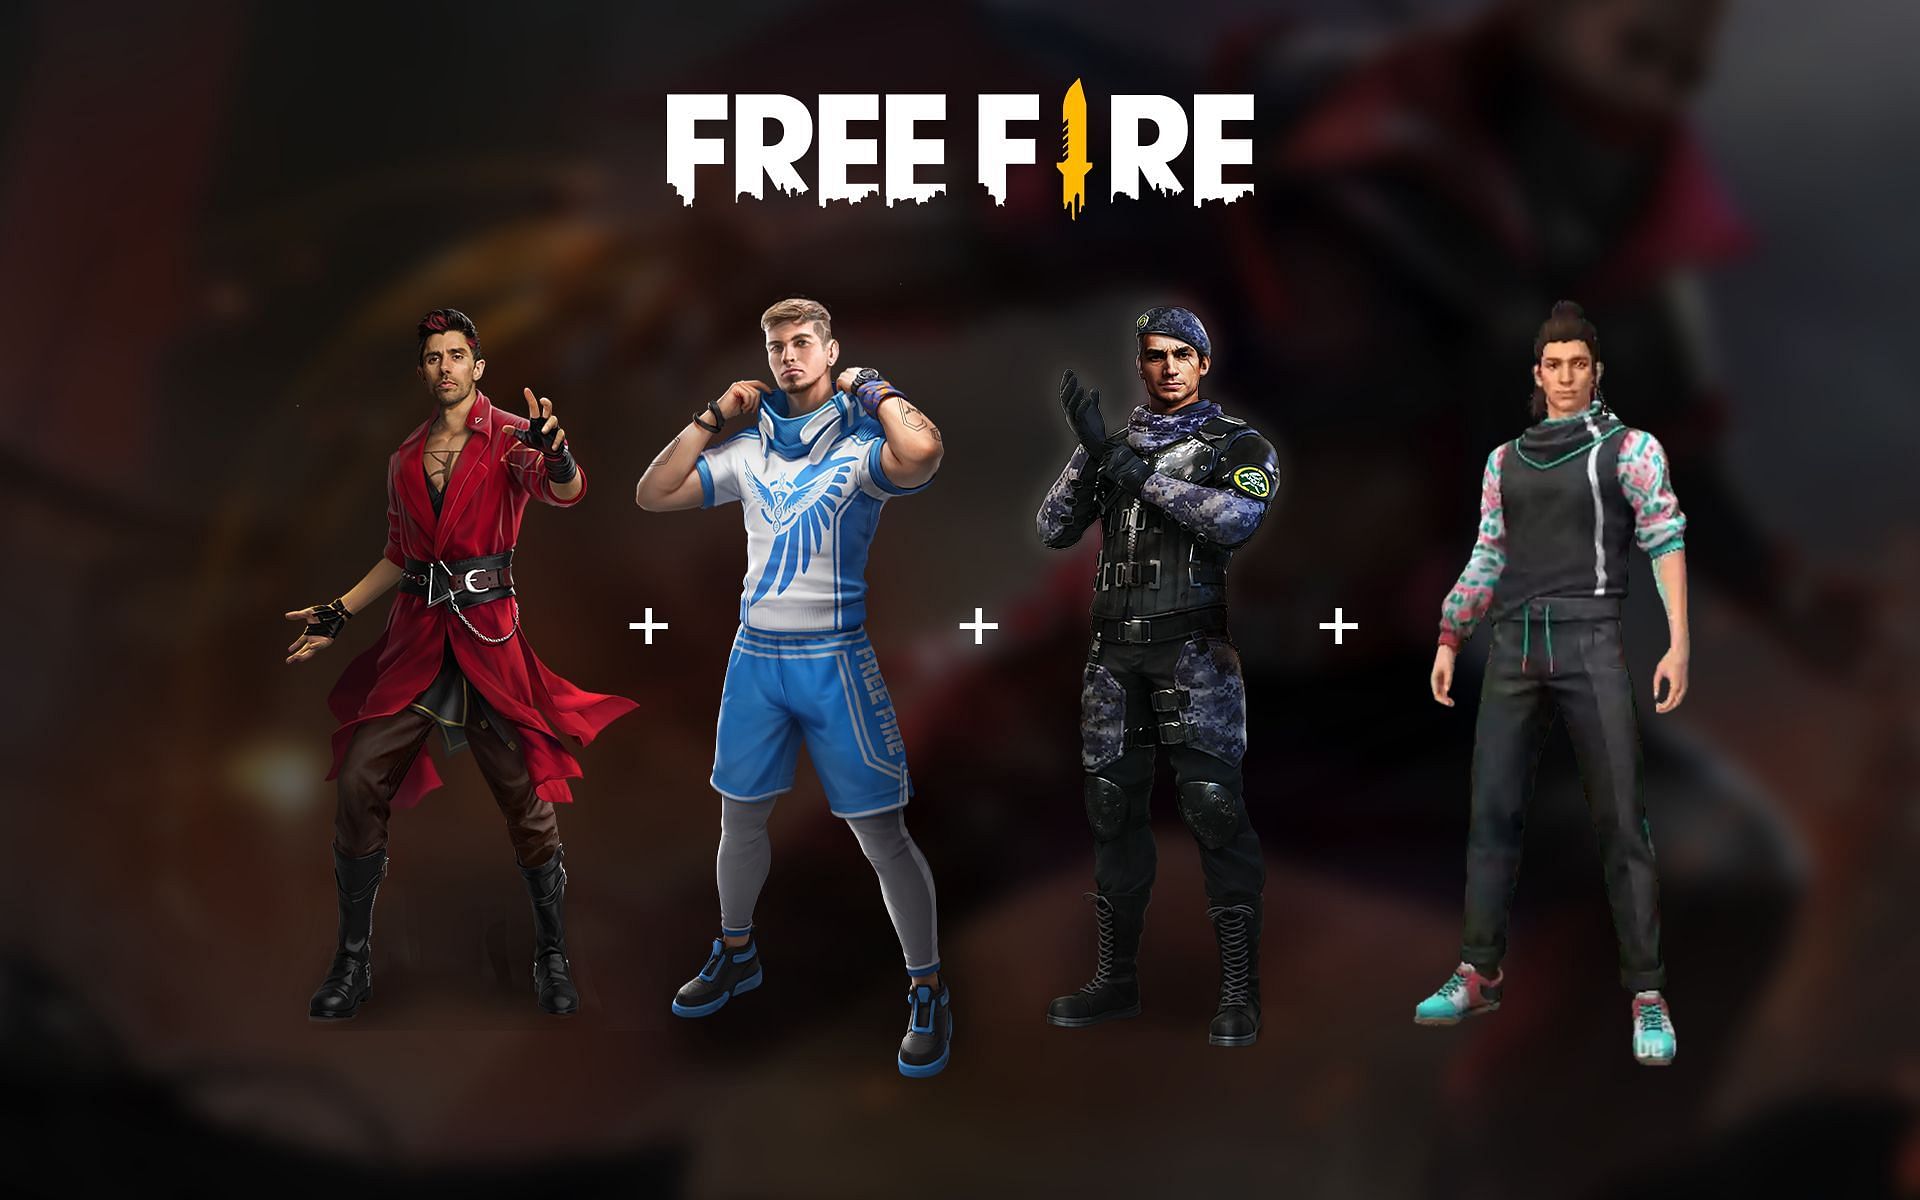 Combinations can help the players immensely (Image via Free Fire)